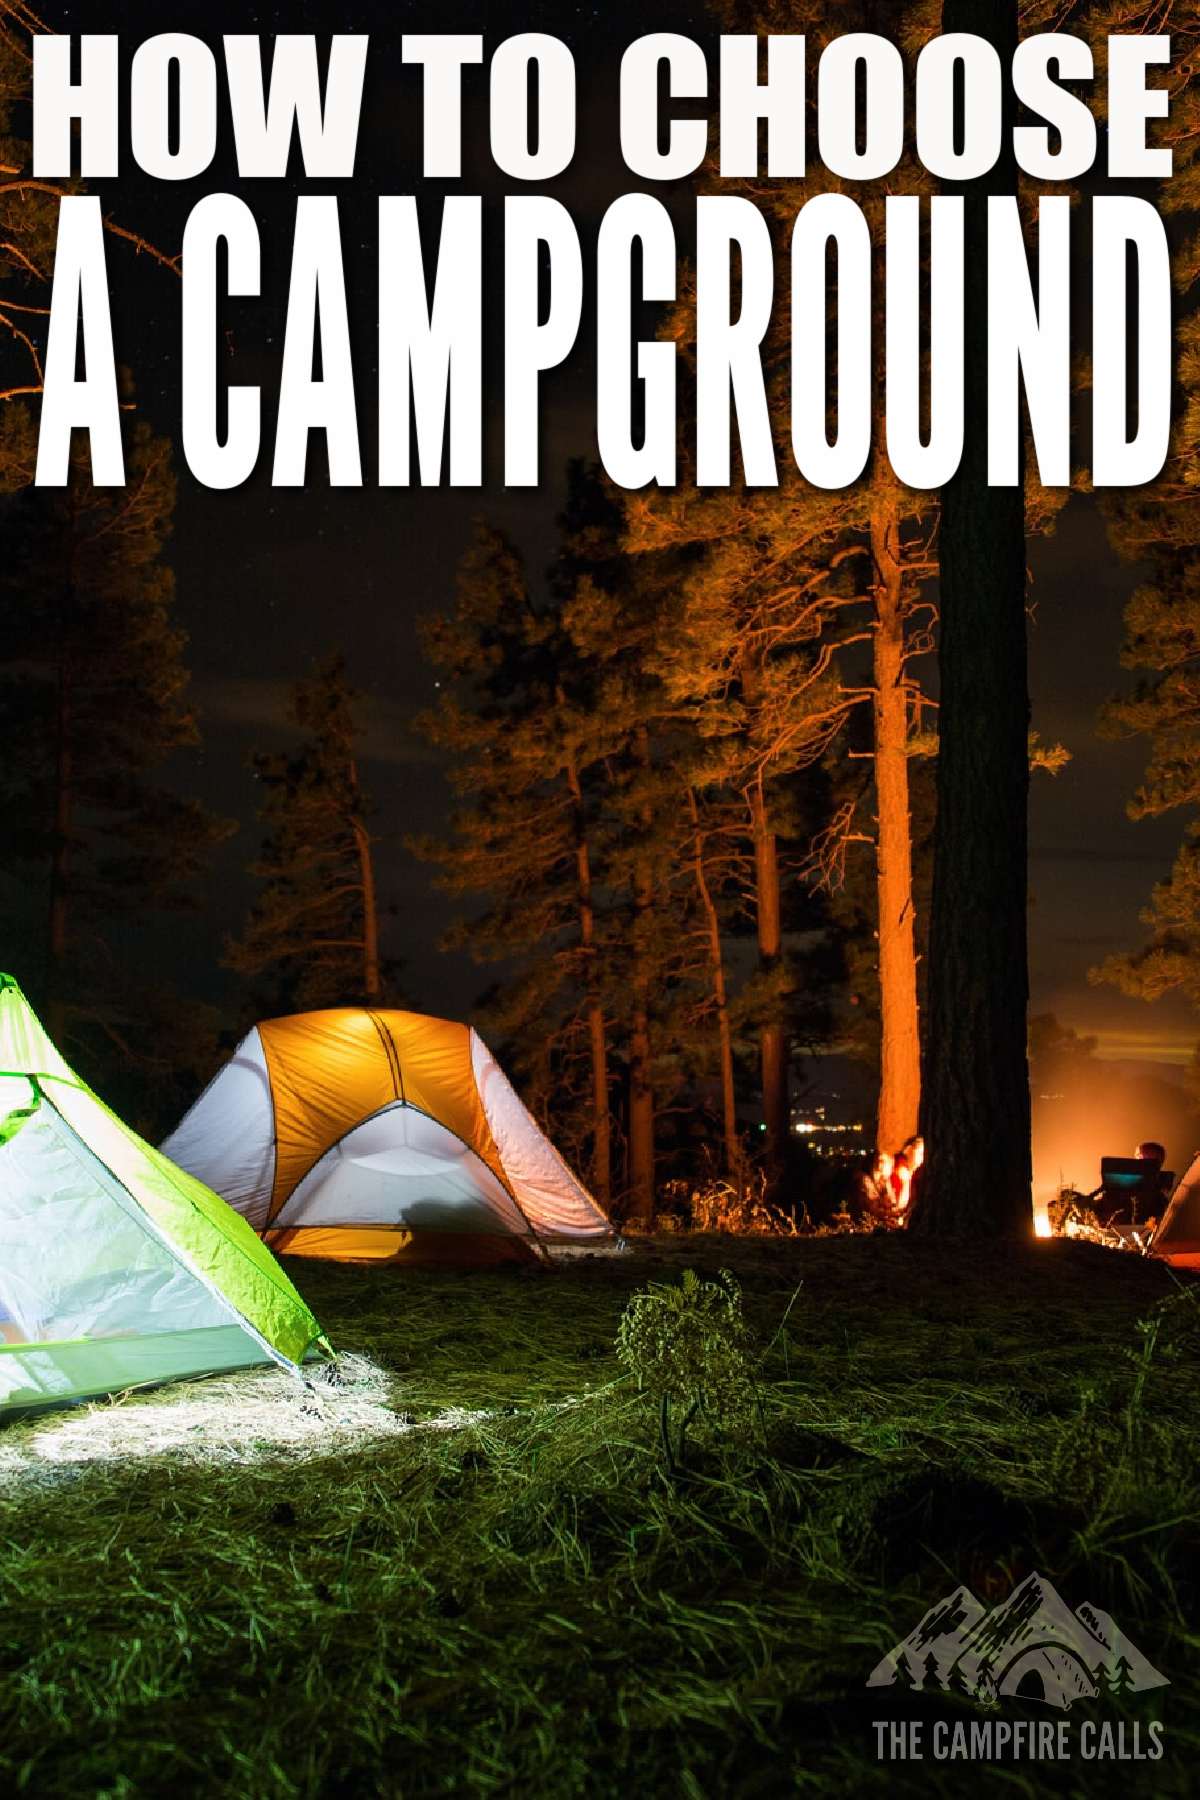 Learn the key factors you should consider when choosing a campground for tent camping so you can find one that's right for your needs.